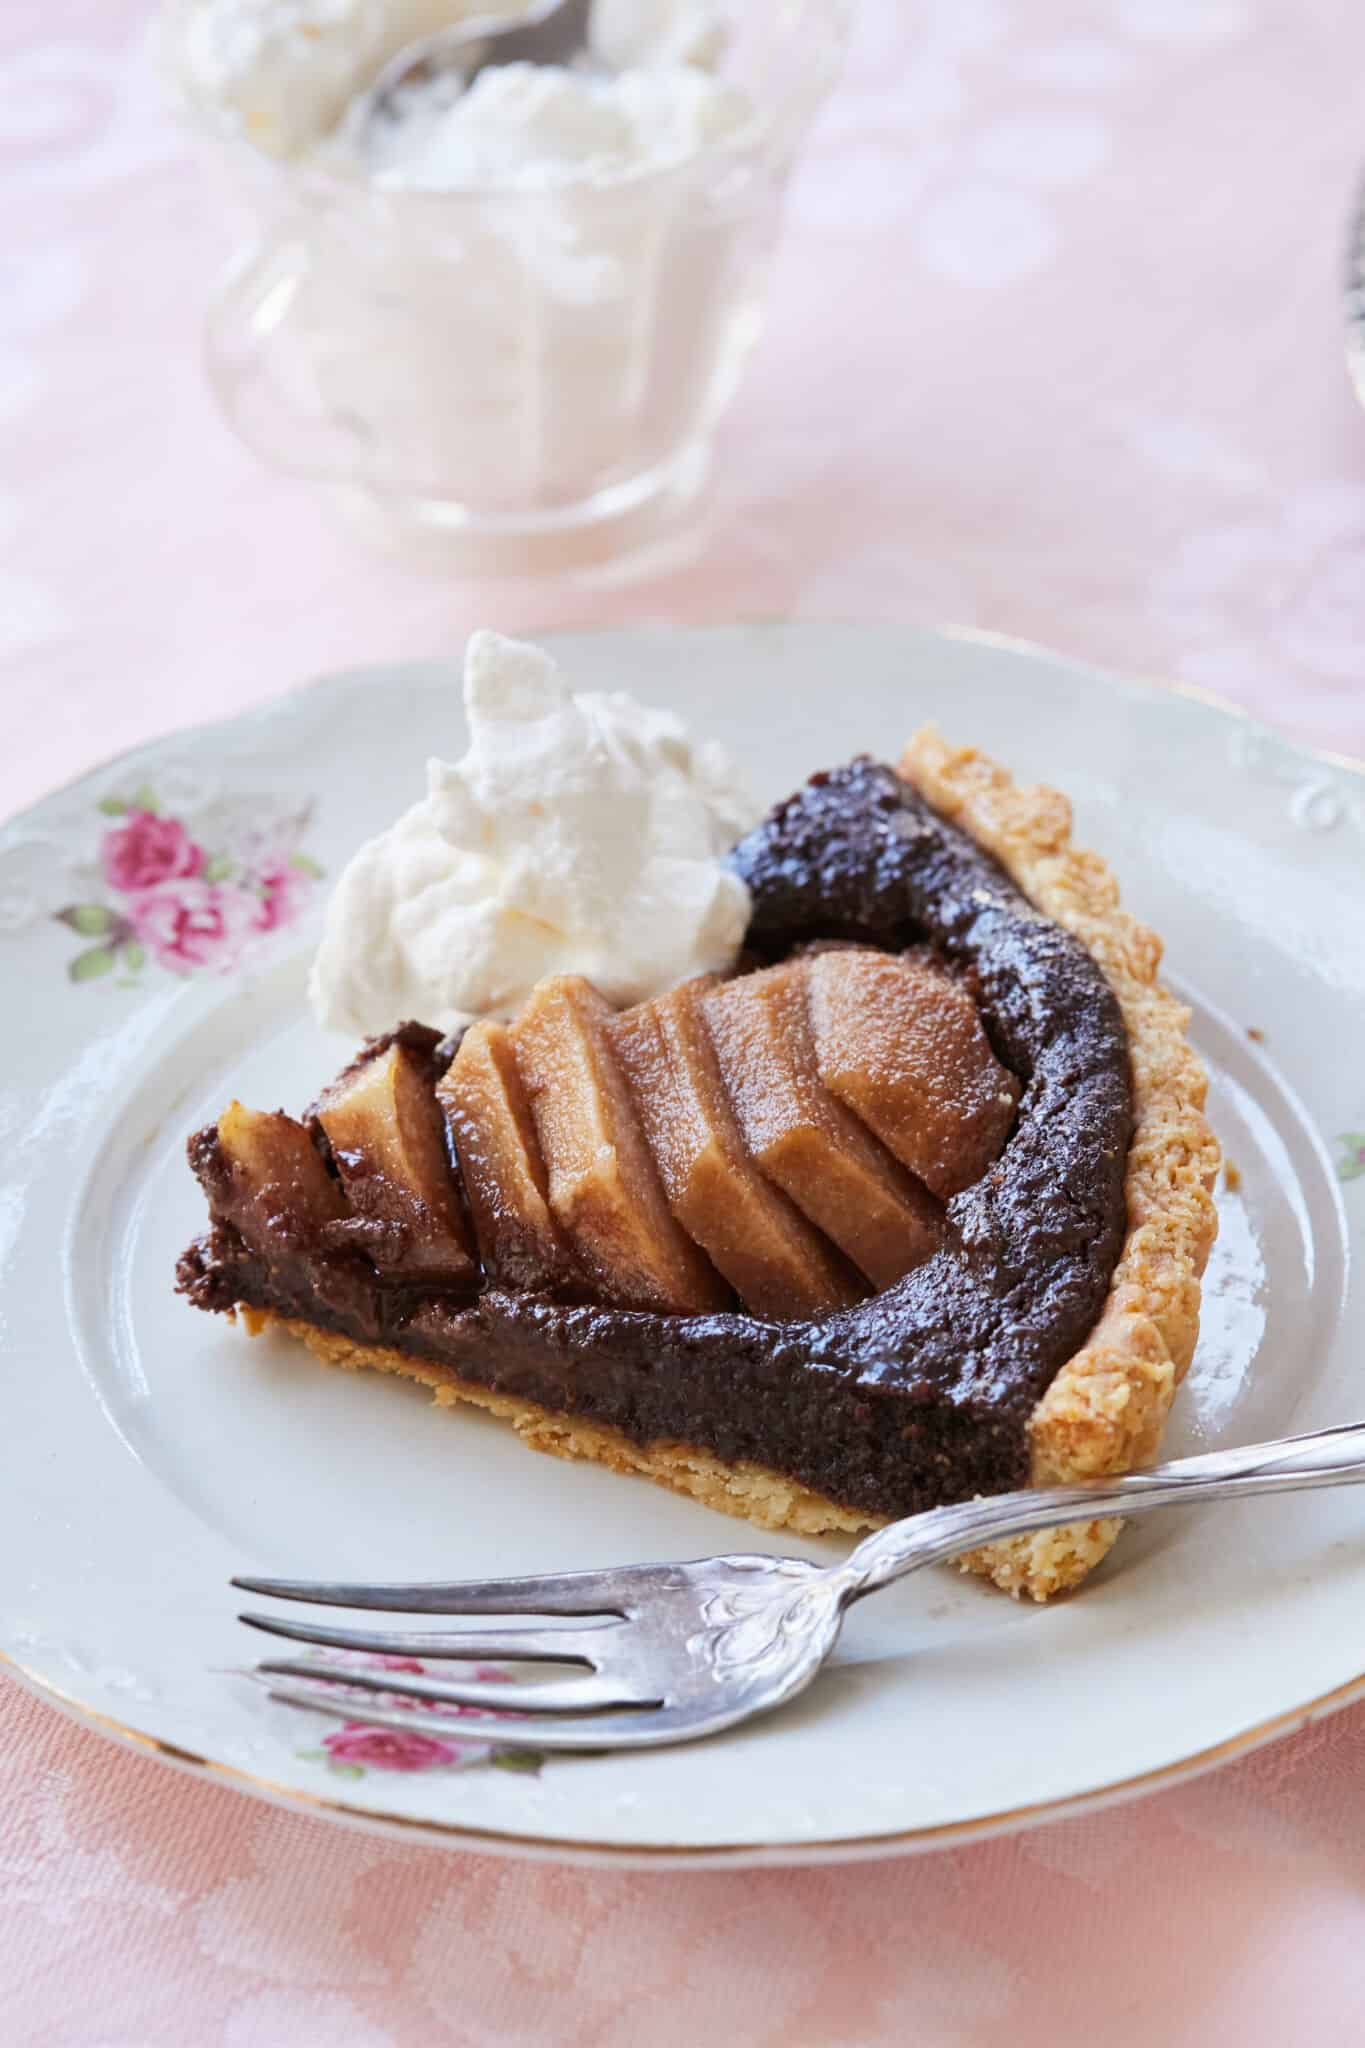 A slice of decadent Pear and Chocolate Frangipane Tart is served on a white porcelain dessert plate with golden trim. The close shot shows the tart has golden crispy crust, a lush almond cocoa filling topped with meltingly tender sliced pears and freshly whipped cream. More whipped cream is in a class cup on the side. 